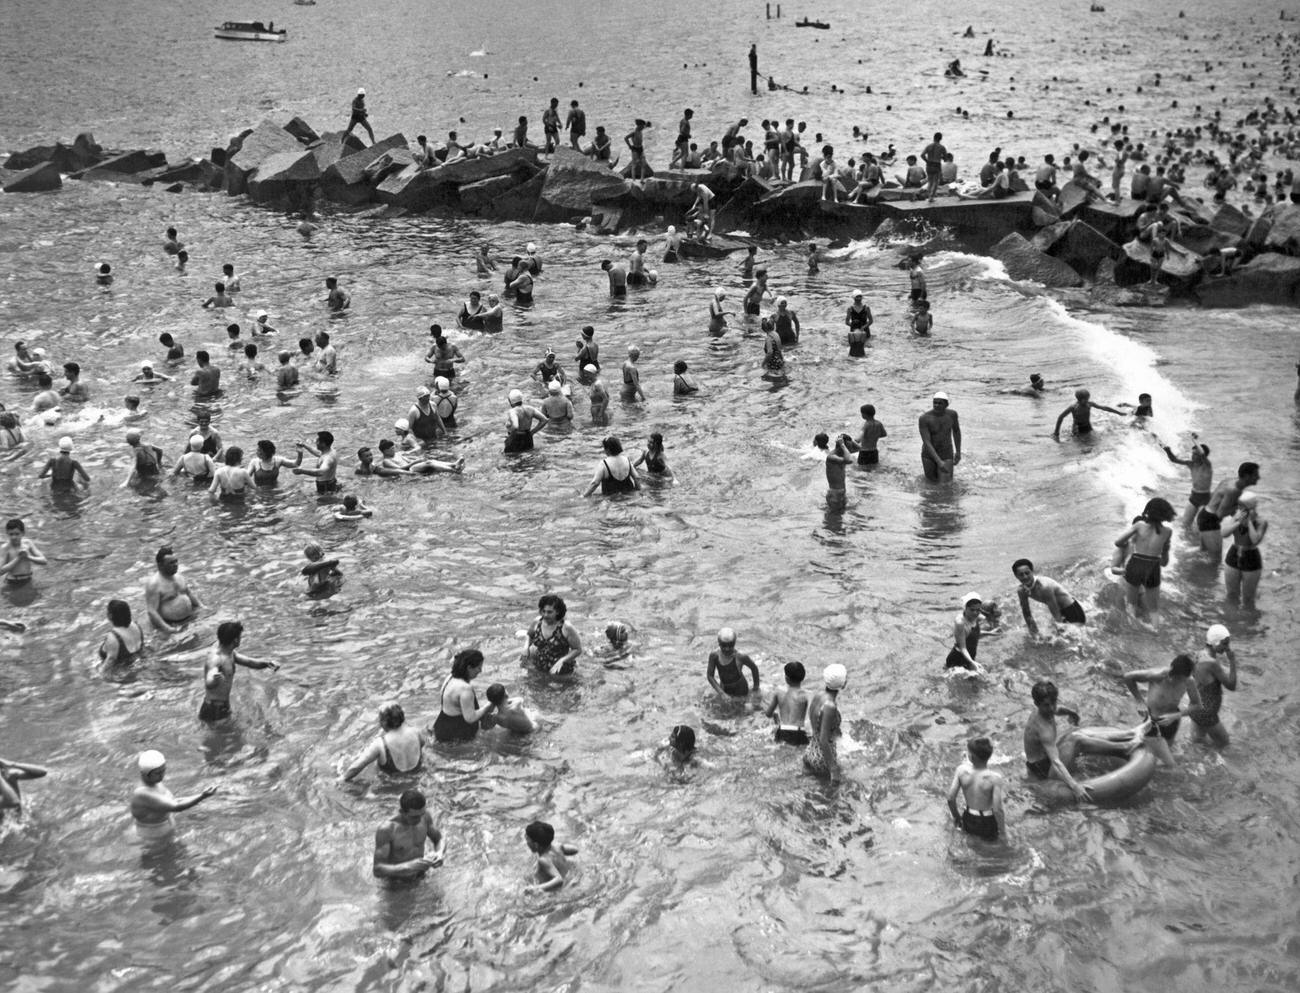 Bathers In Surf At Coney Island, July 1938